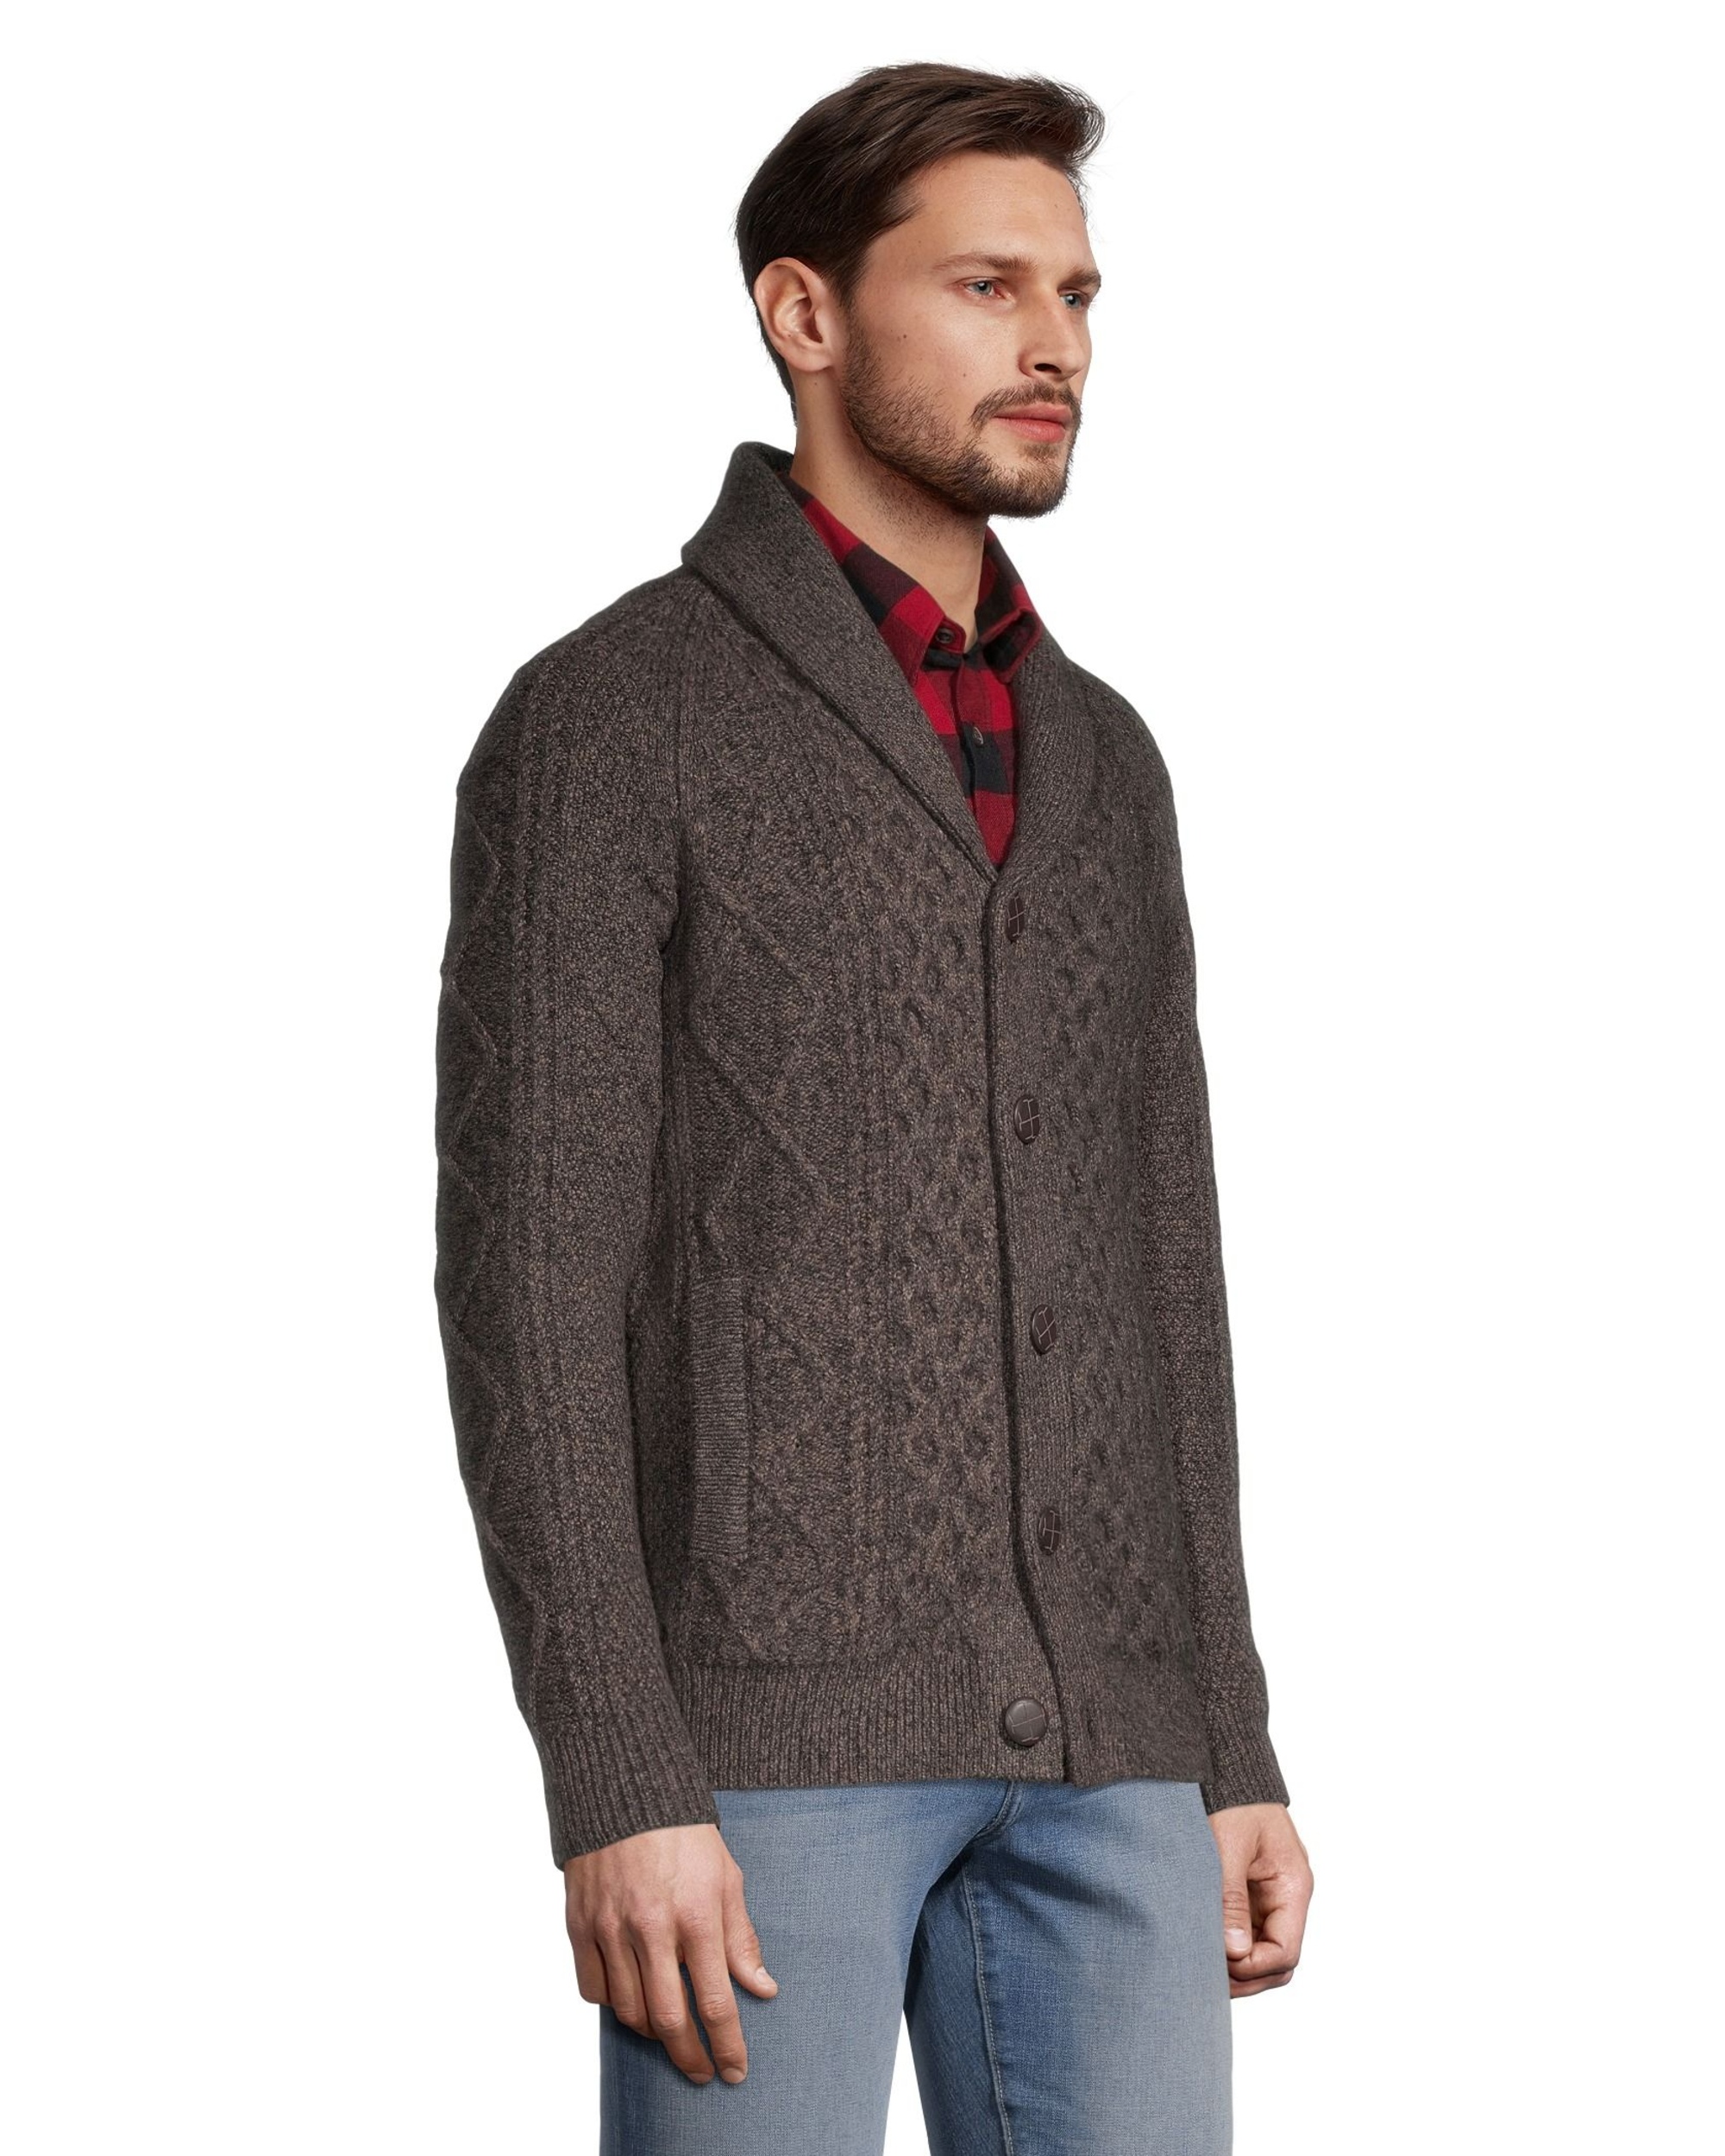 WindRiver Men's Heritage Cable Button Shawl Cardigan Sweater | Marks